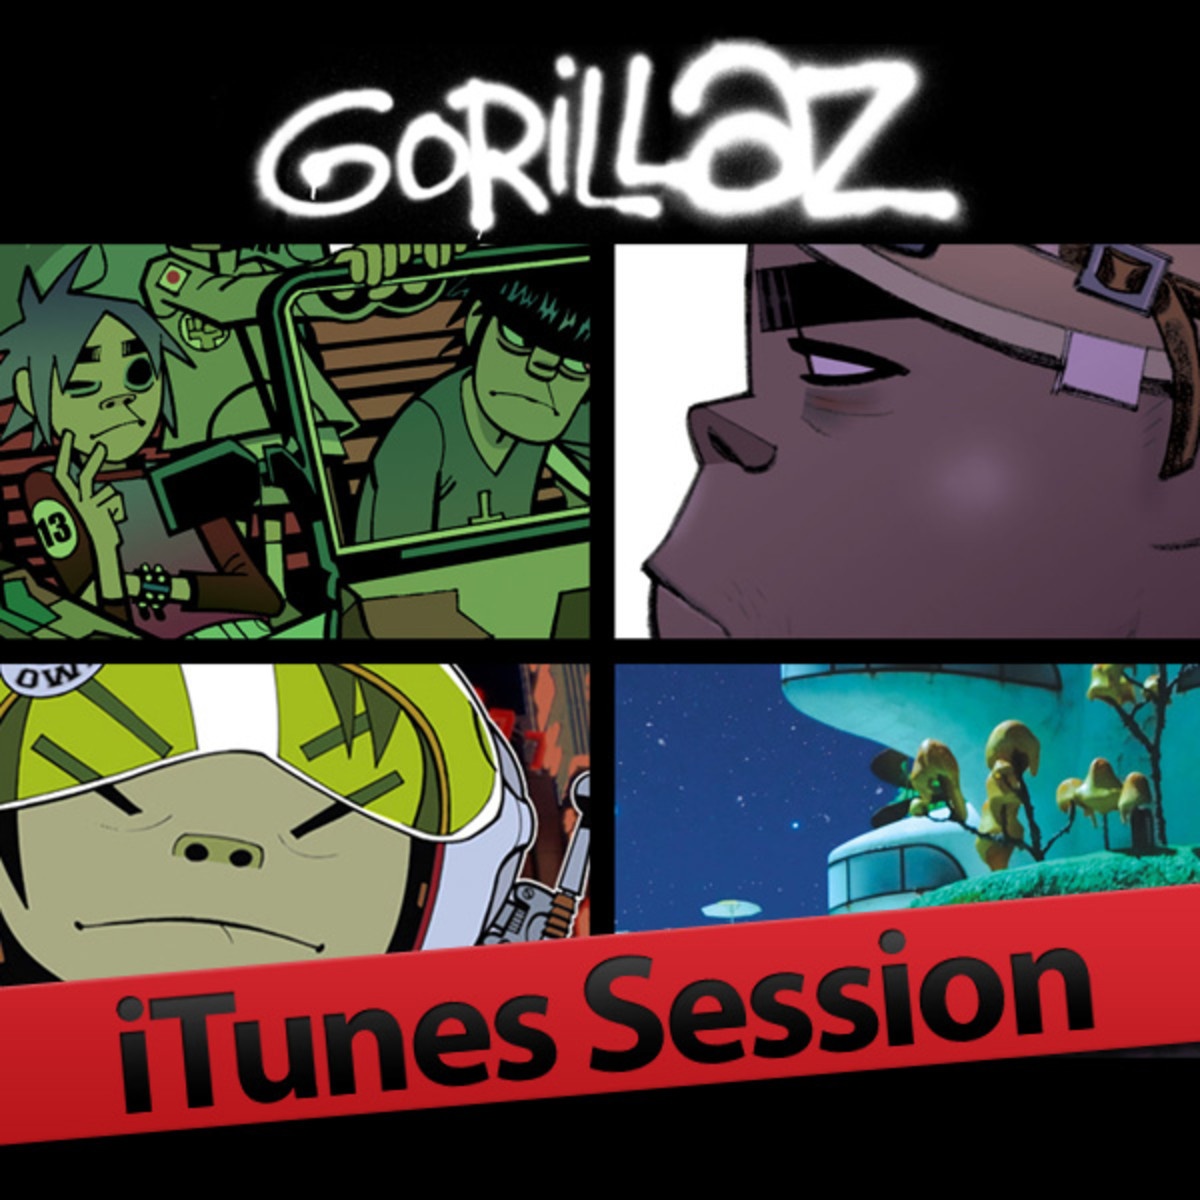 On Melancholy Hill (iTunes Session)